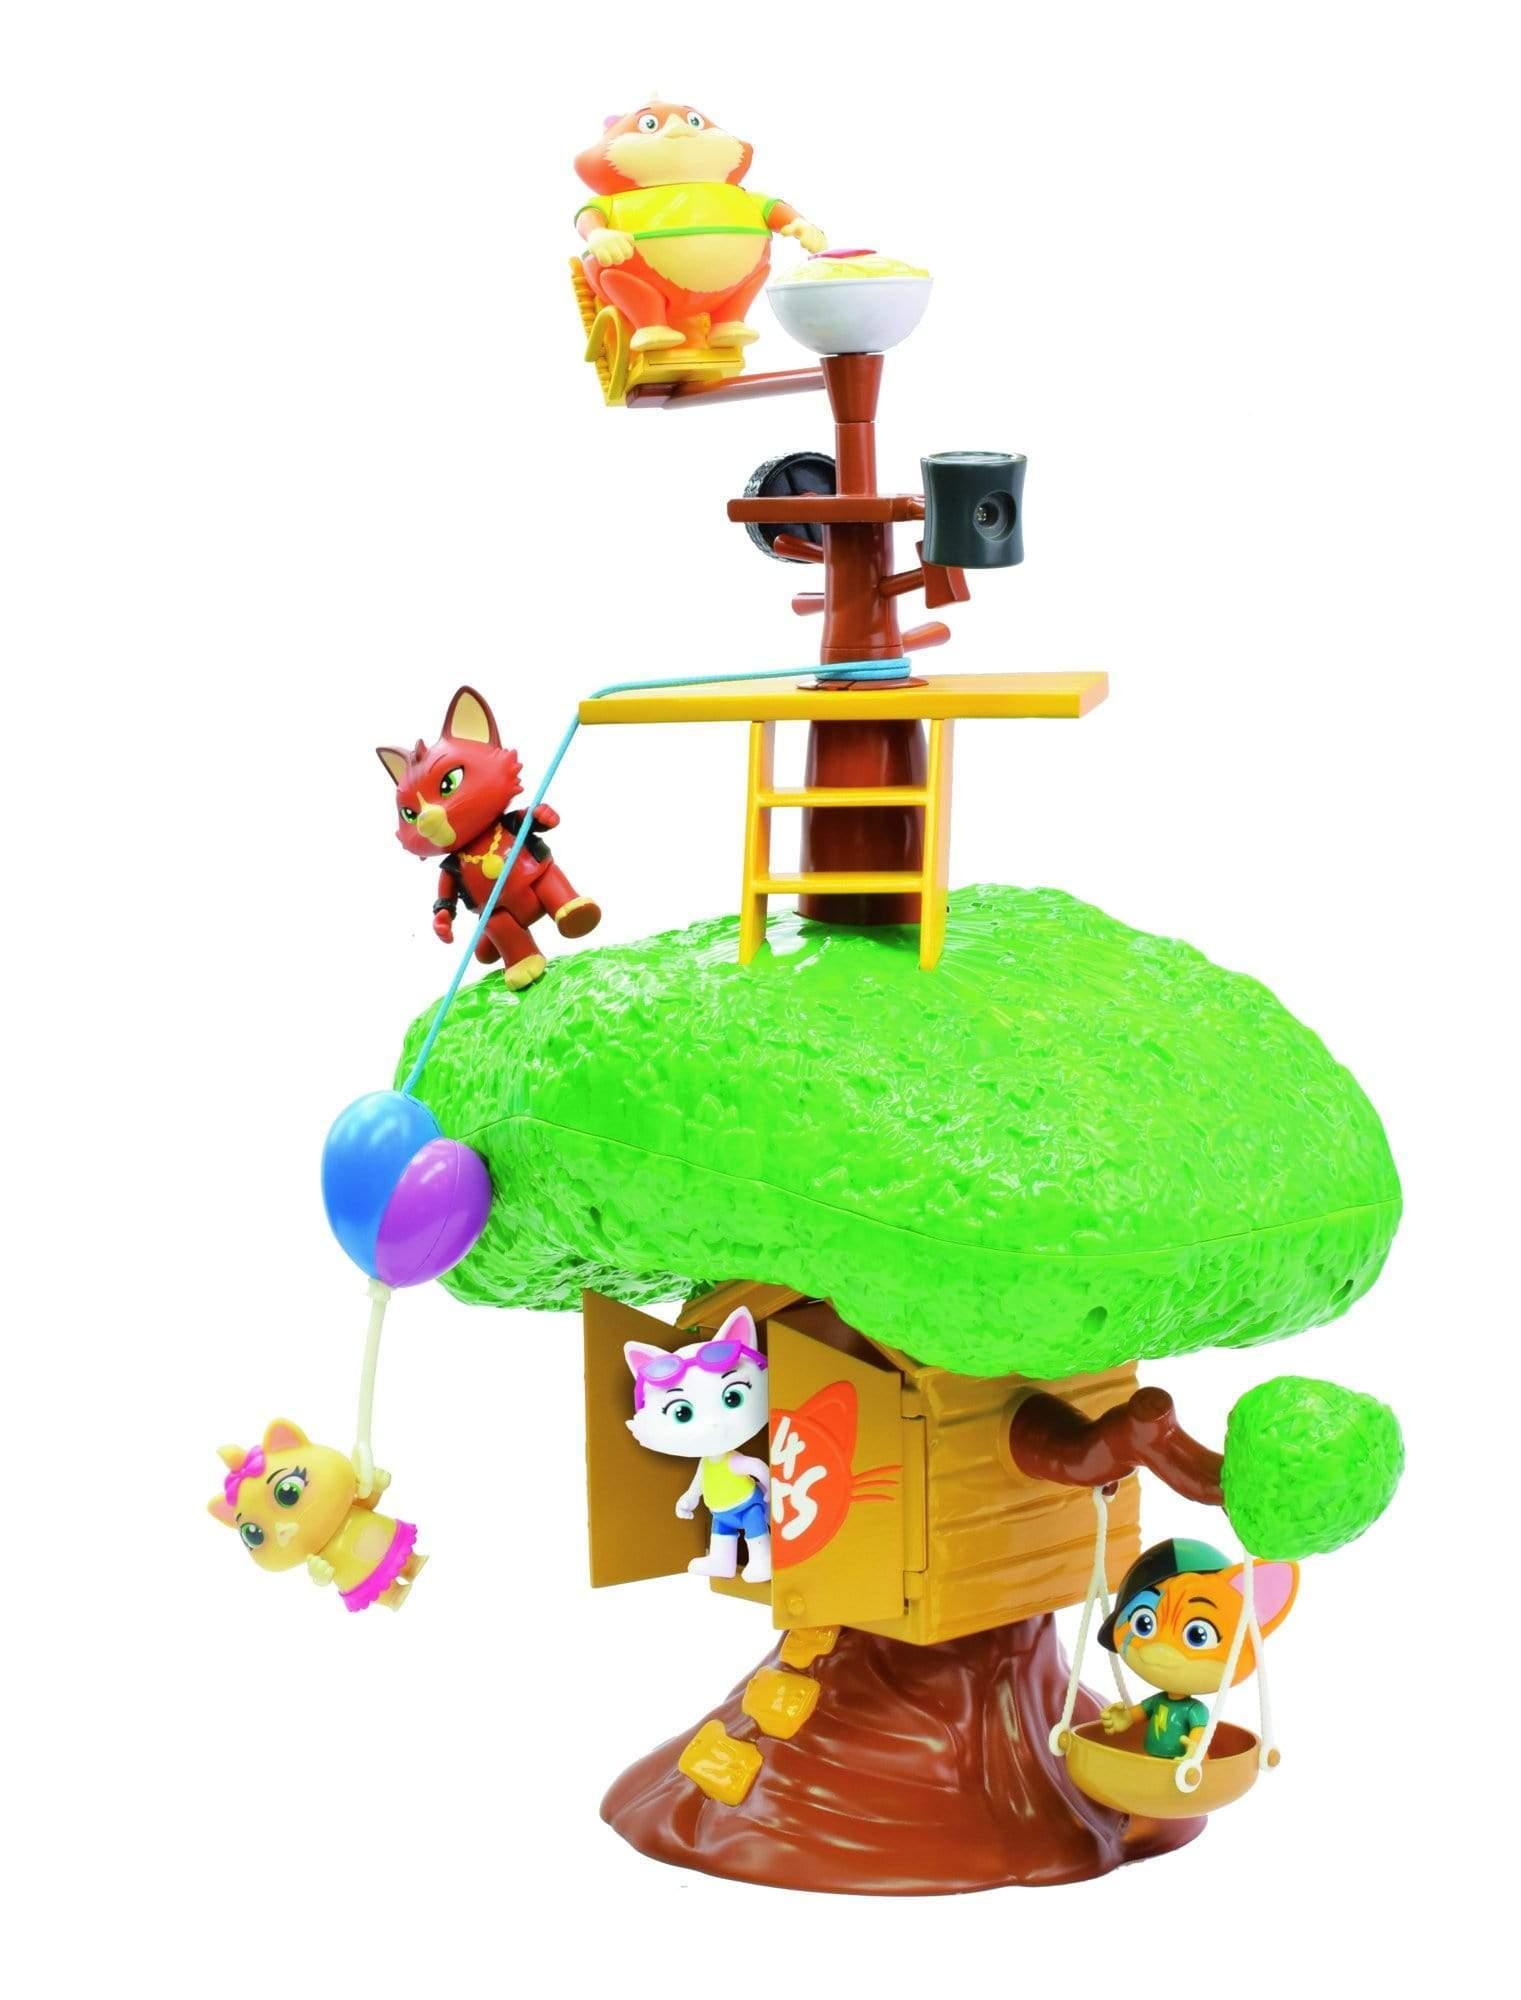 45 CATS 44cats large playset tree house